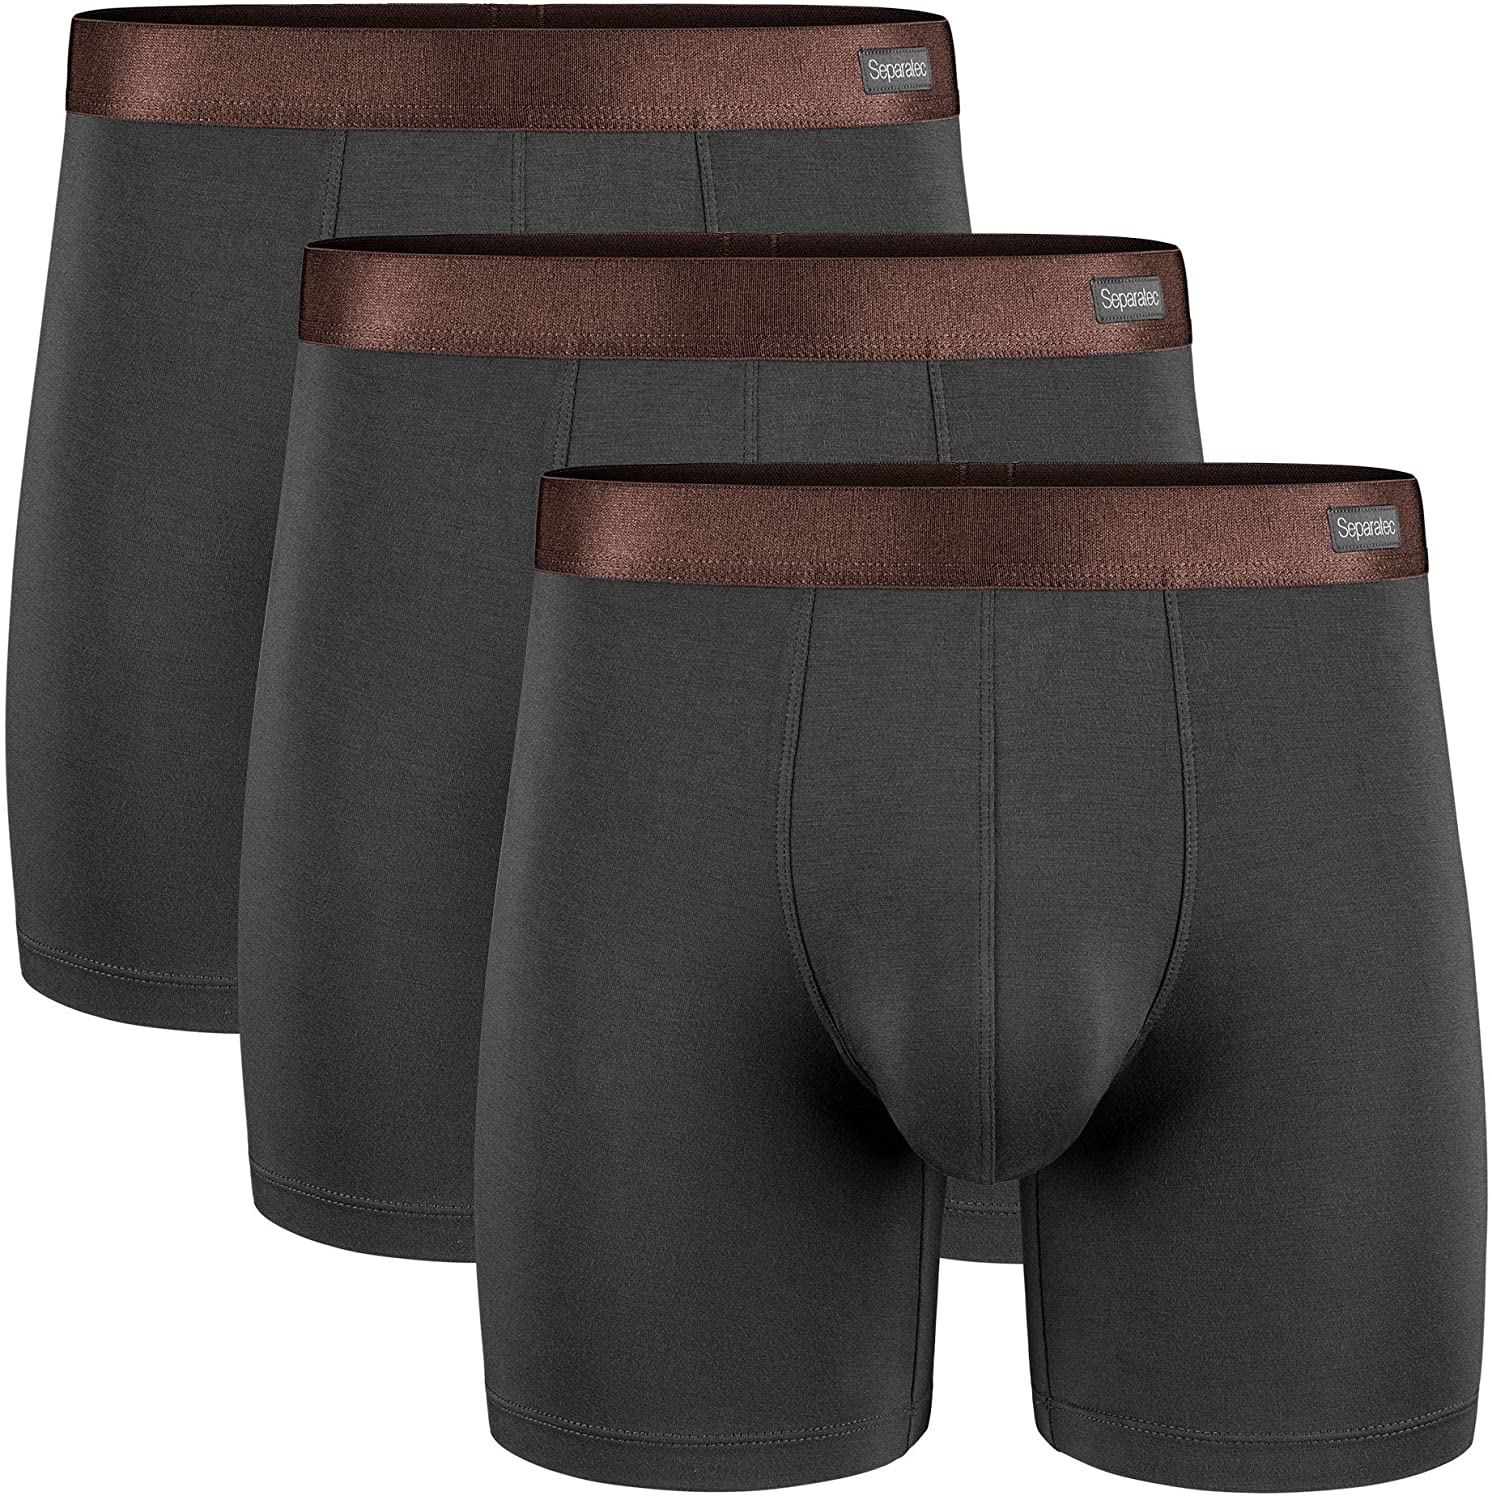 Separatec Men's Soft Bamboo Rayon Separate Pouch Underwear Long